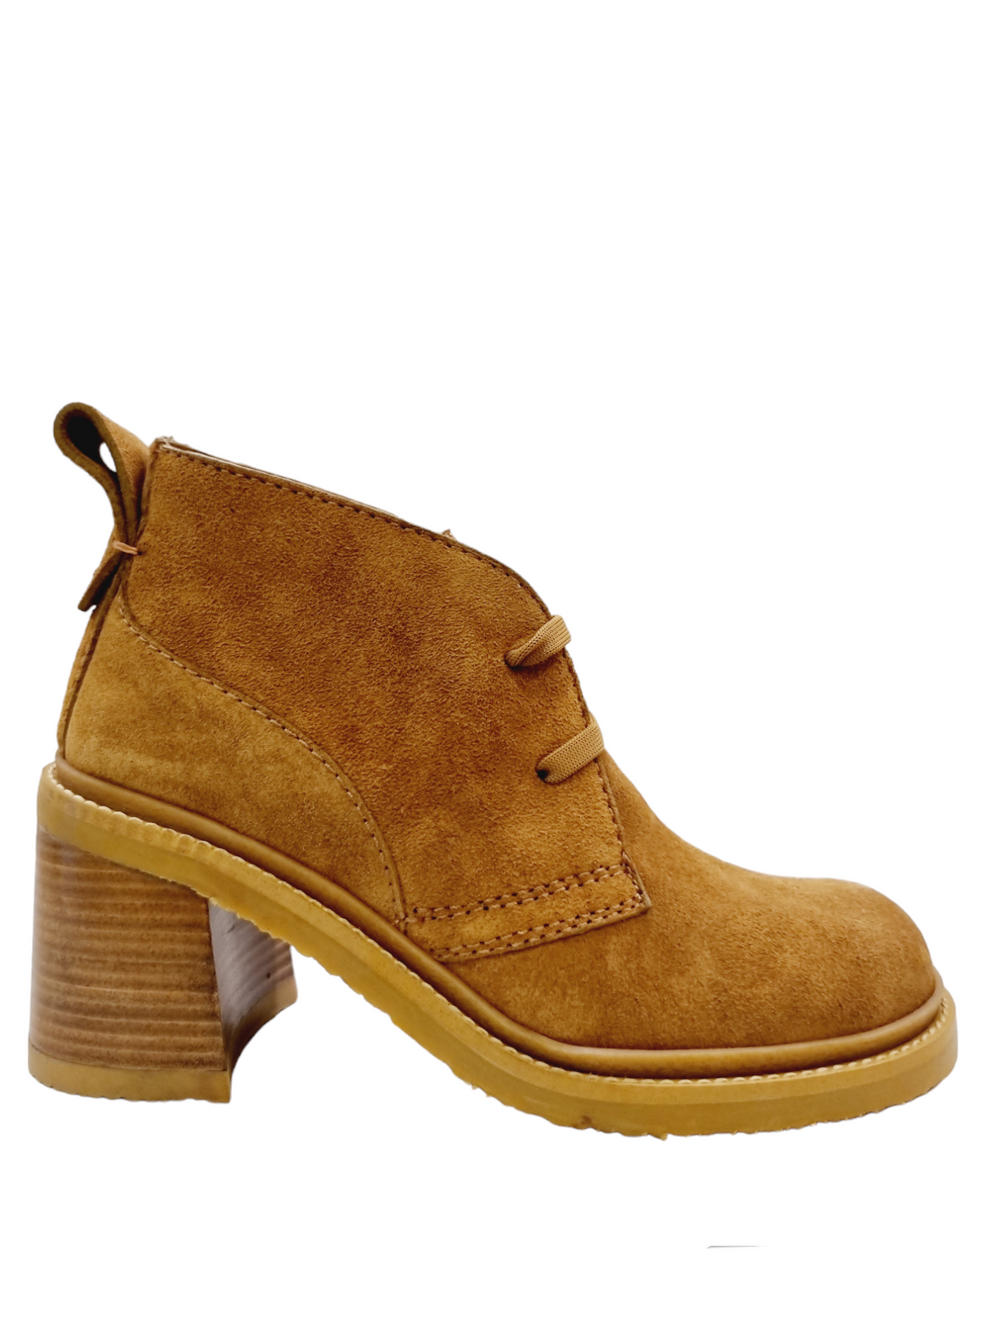 Bangle Tan Suede Boots - SEE BY CHLOE - Liberty Shoes Australia